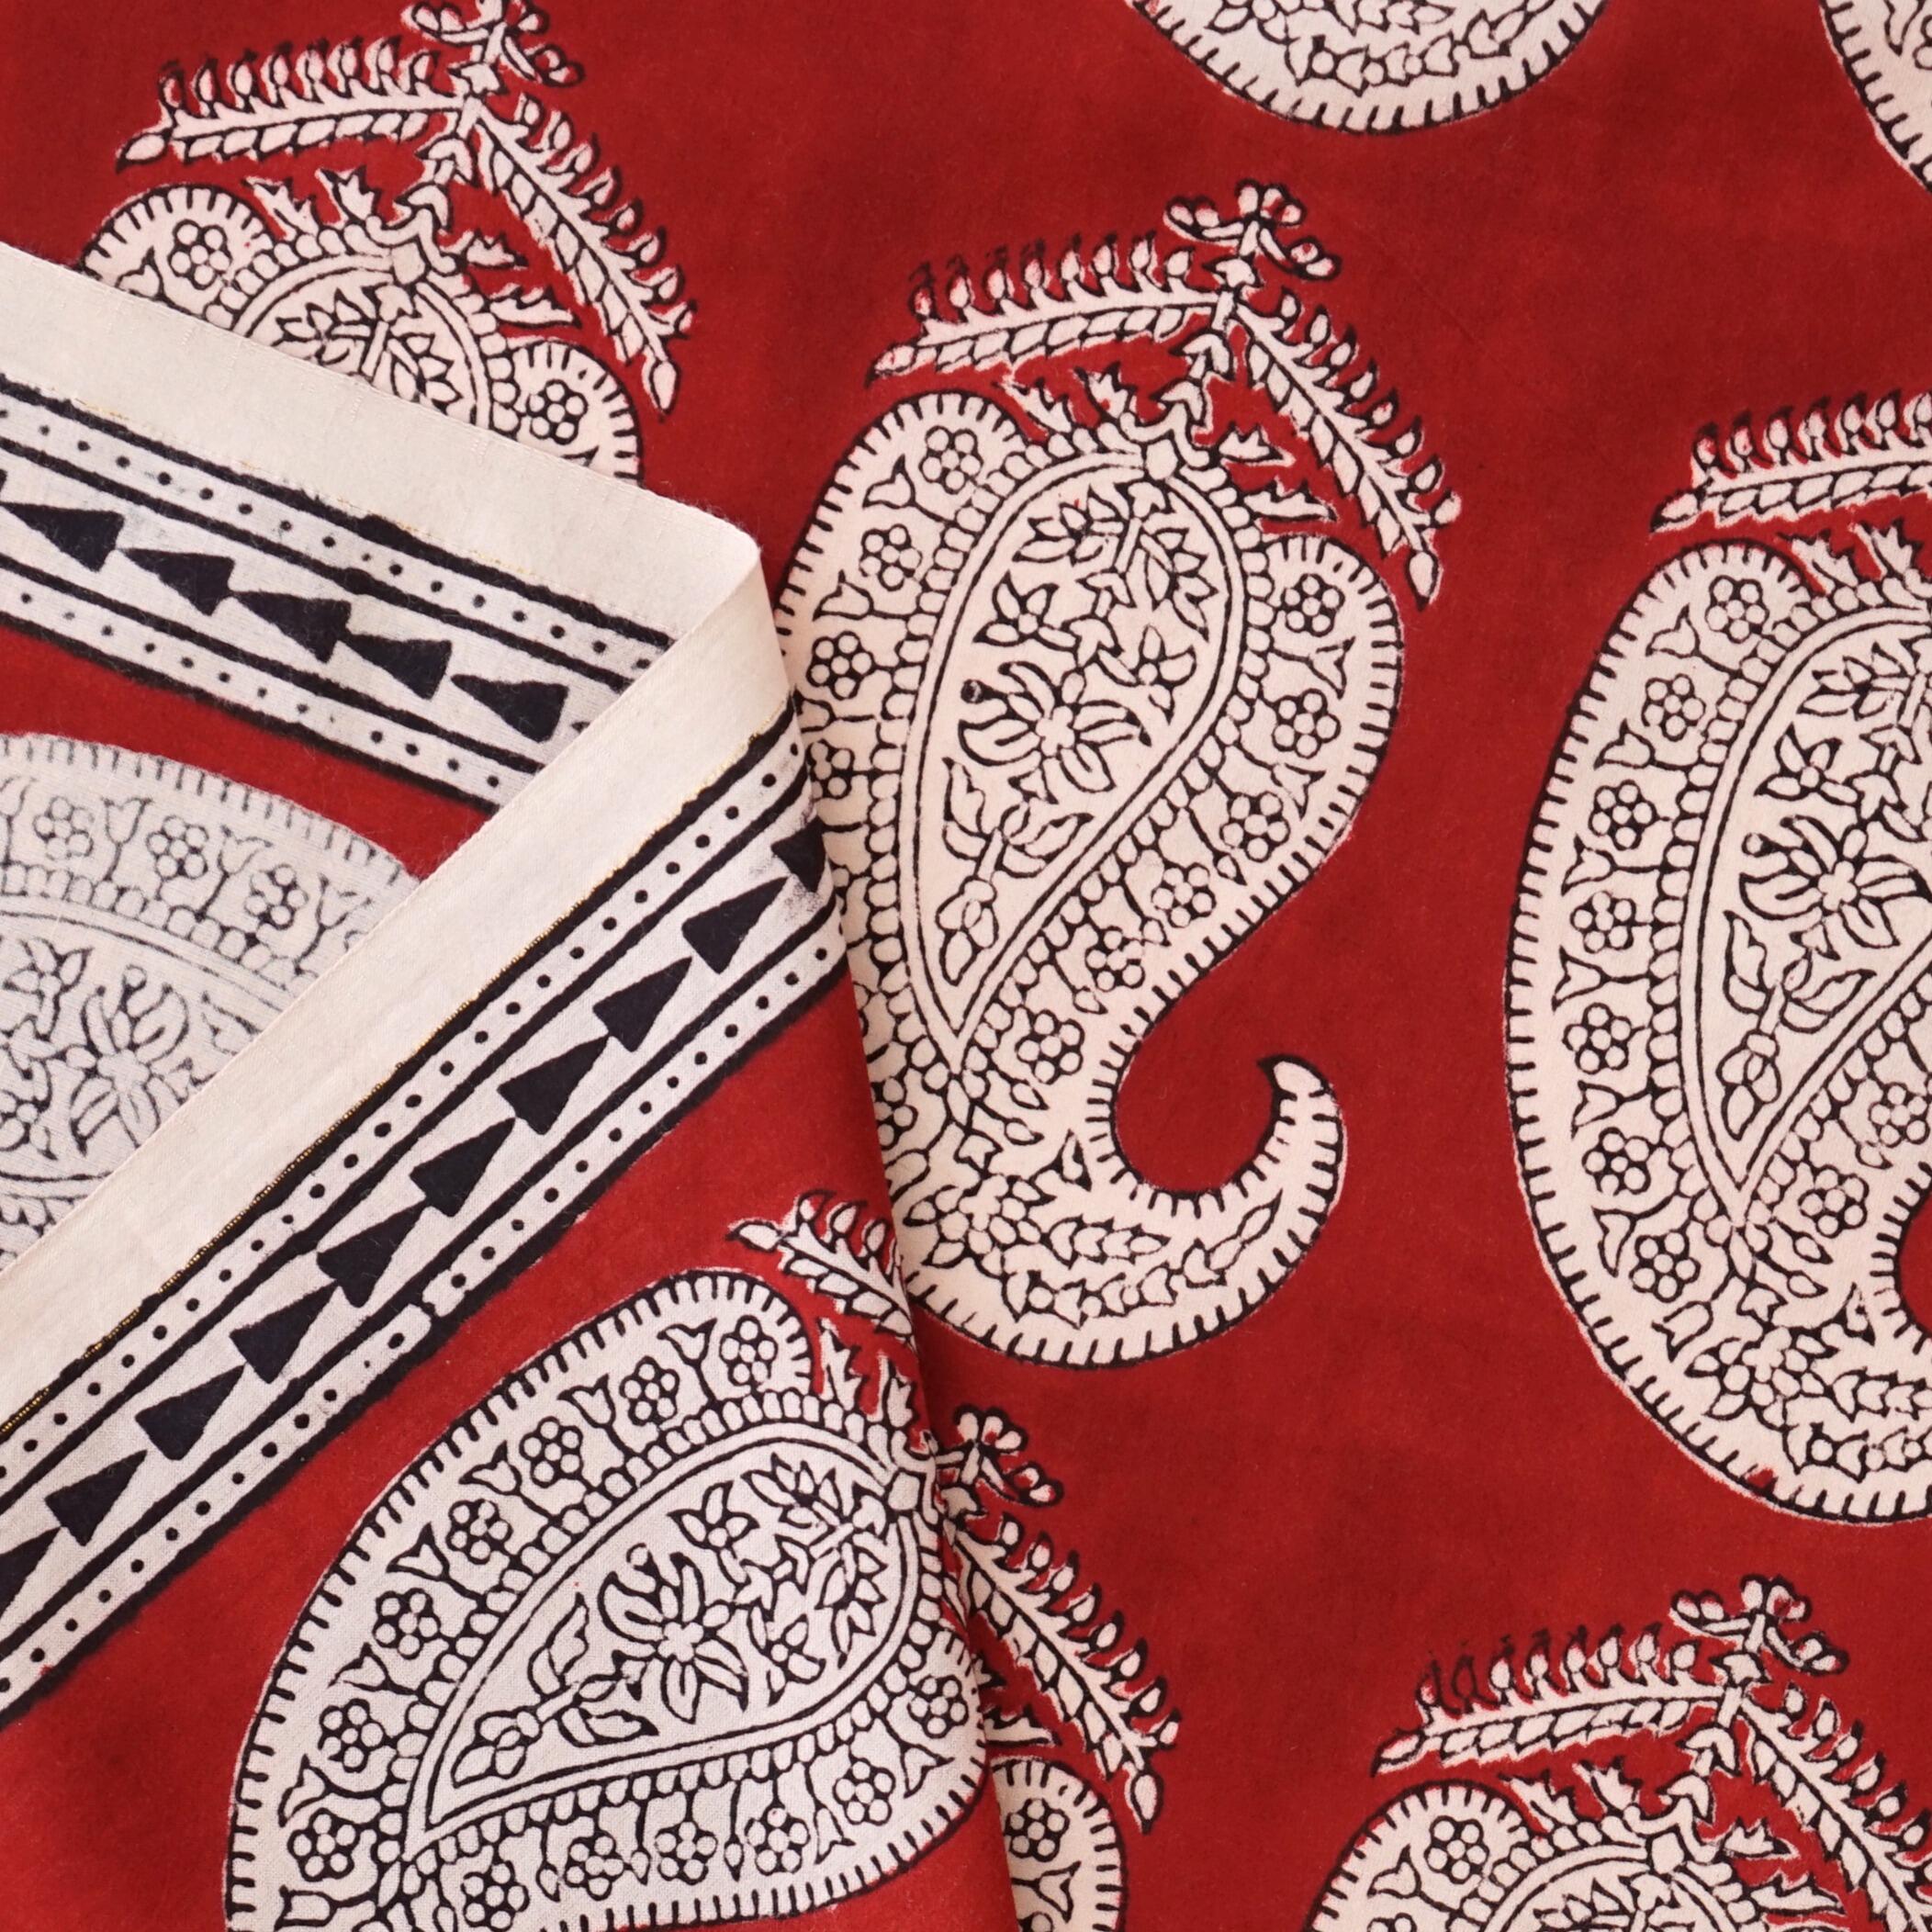 100% Block-Printed Cotton Fabric From India - Breadfruit Design - Iron Rust Black & Alizarin Red Dyes - Selvedge